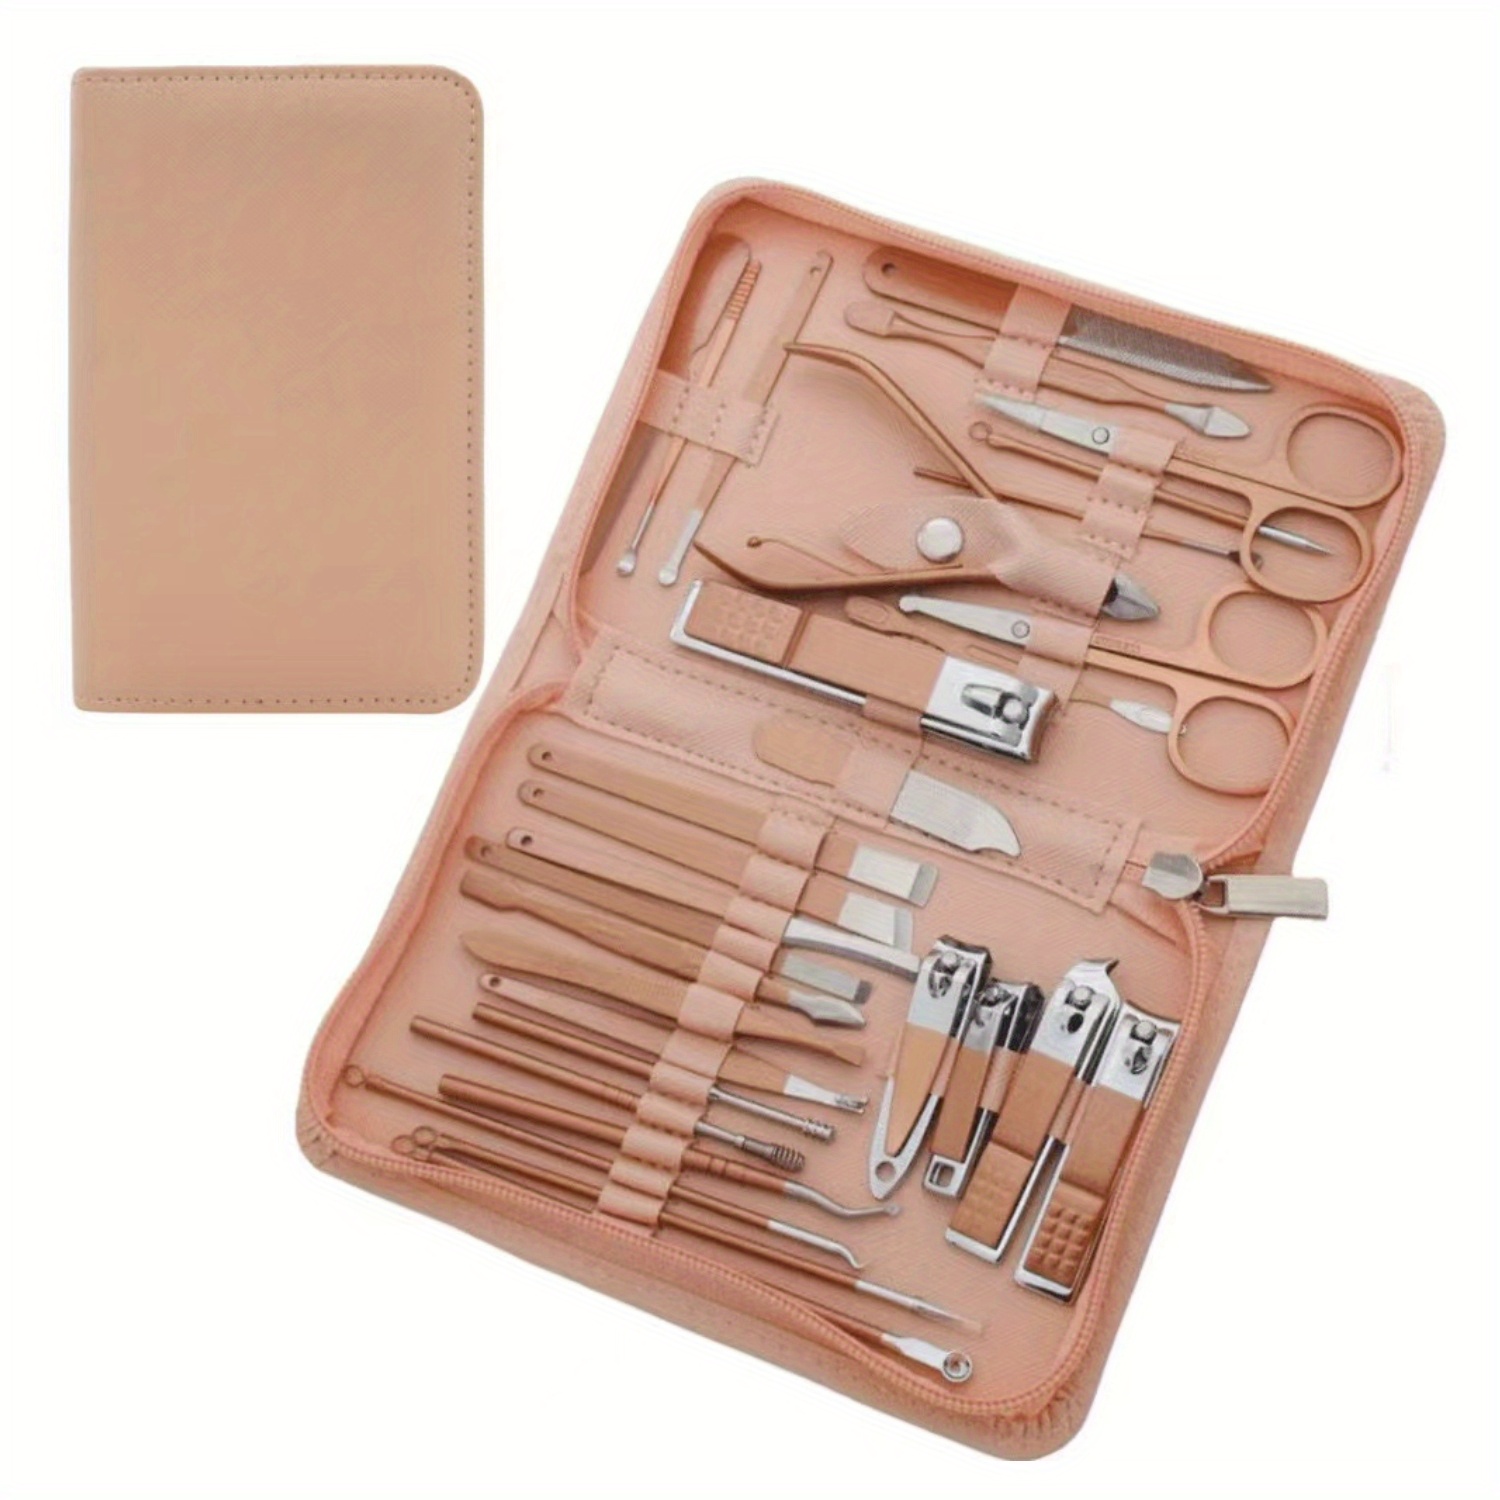 

Ultimate 30-piece Nail Grooming Kit: Professional Manicure & Pedicure Tools, Modern Design, Travel-ready With Elegant Case - Perfect For Precise, Safe Nail Care